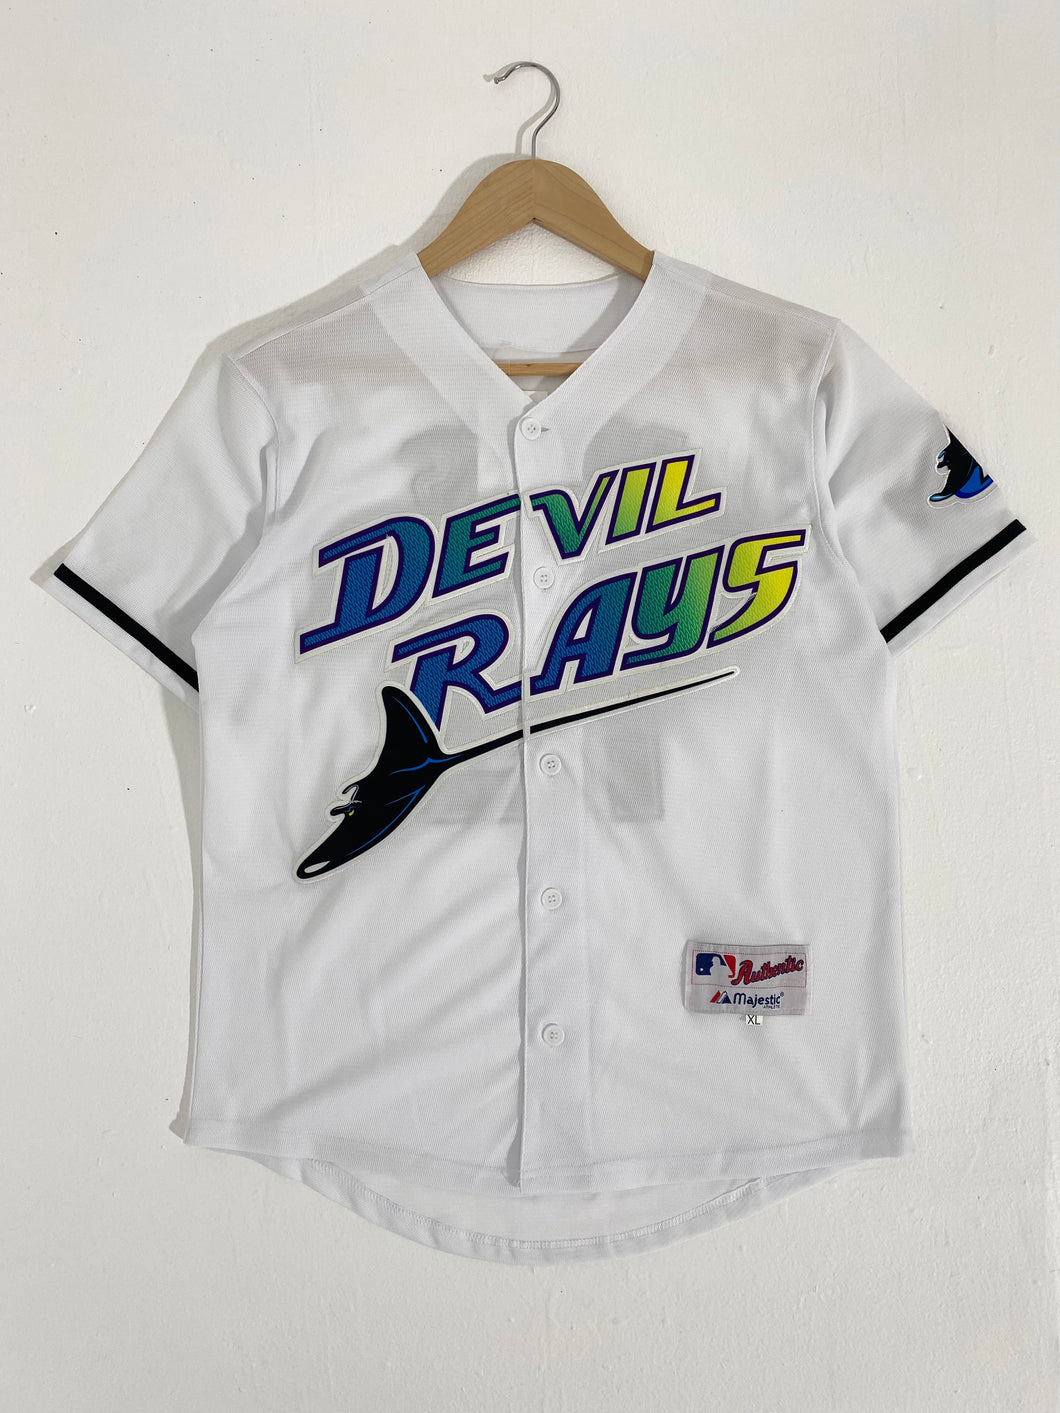 tampa bay rays classic jersey